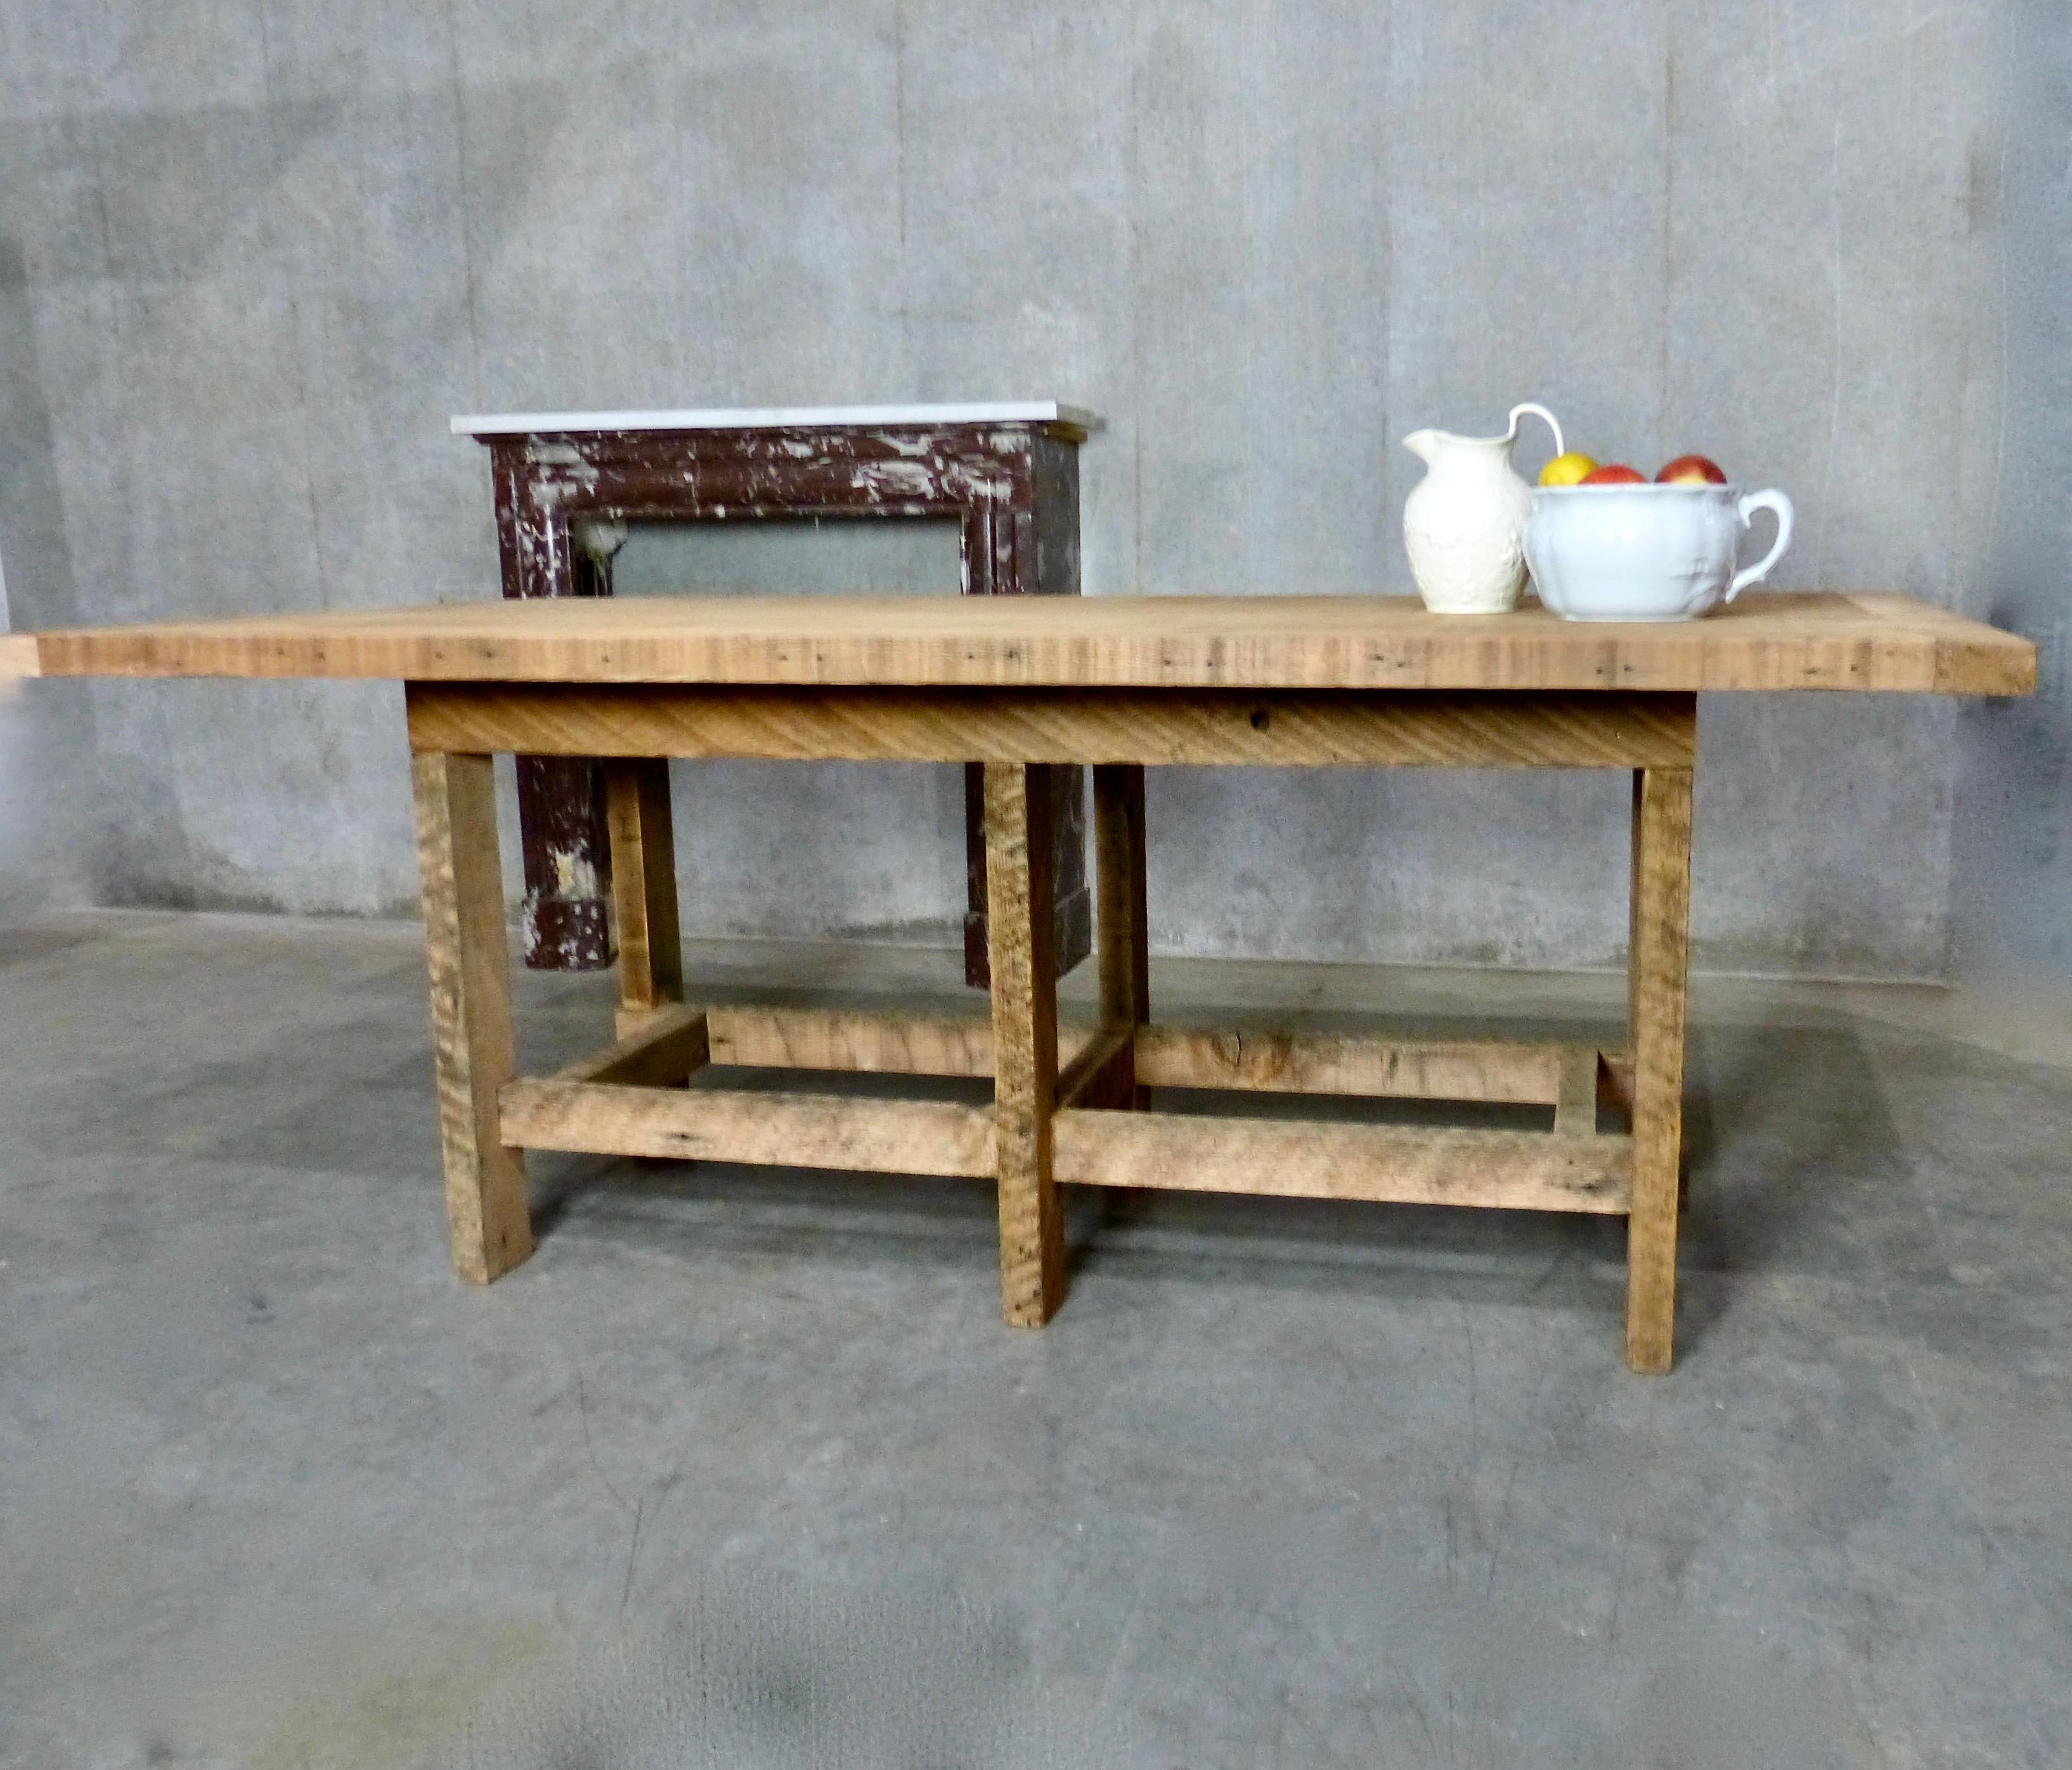 Bespoke solid reclaimed fir raw plank table with reclaimed wood frame. Frame features six post-style legs and cross bars. Table designed to show top fresh cuts.


Dimensions: 30 H” x 78 W” x 36 D”.